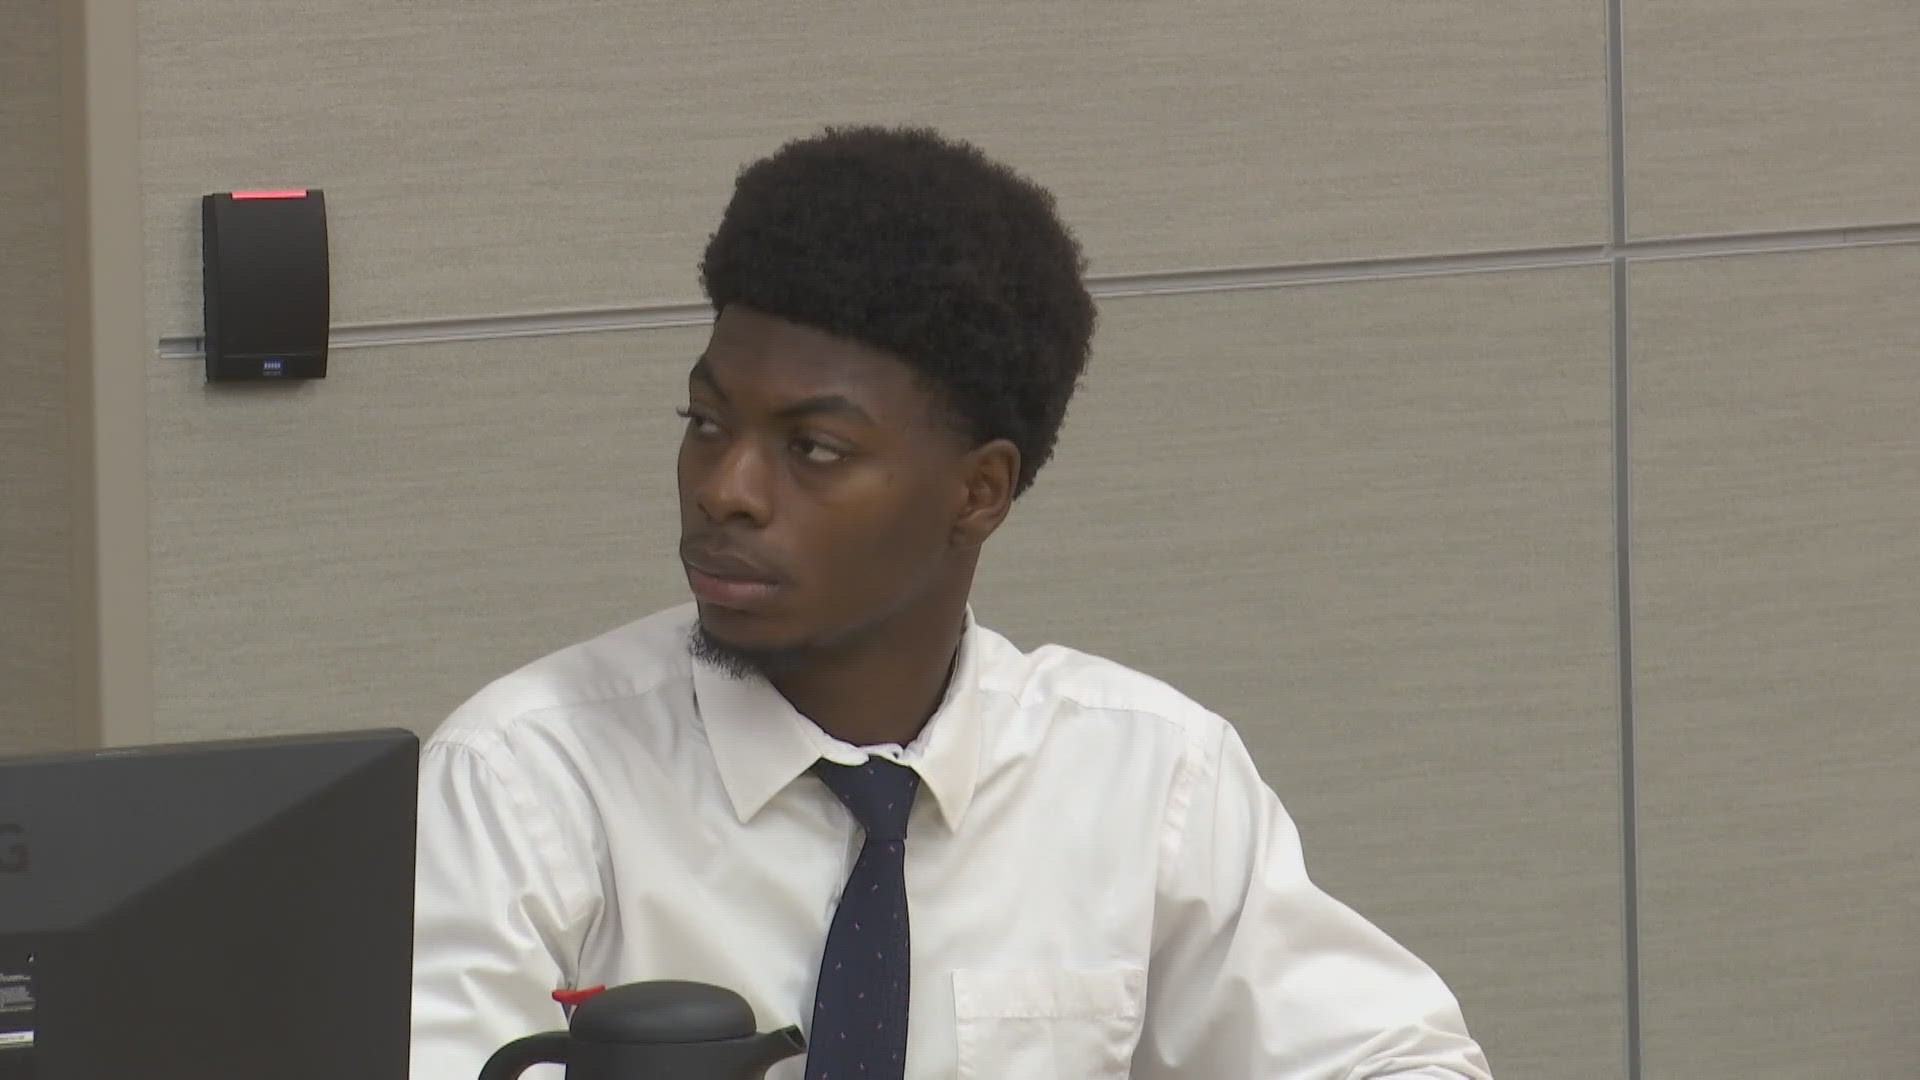 Maxey was found guilty on attempted murder, aggravated assault, and carrying a knife on school property in the 2021 stabbing case against a North Central student.